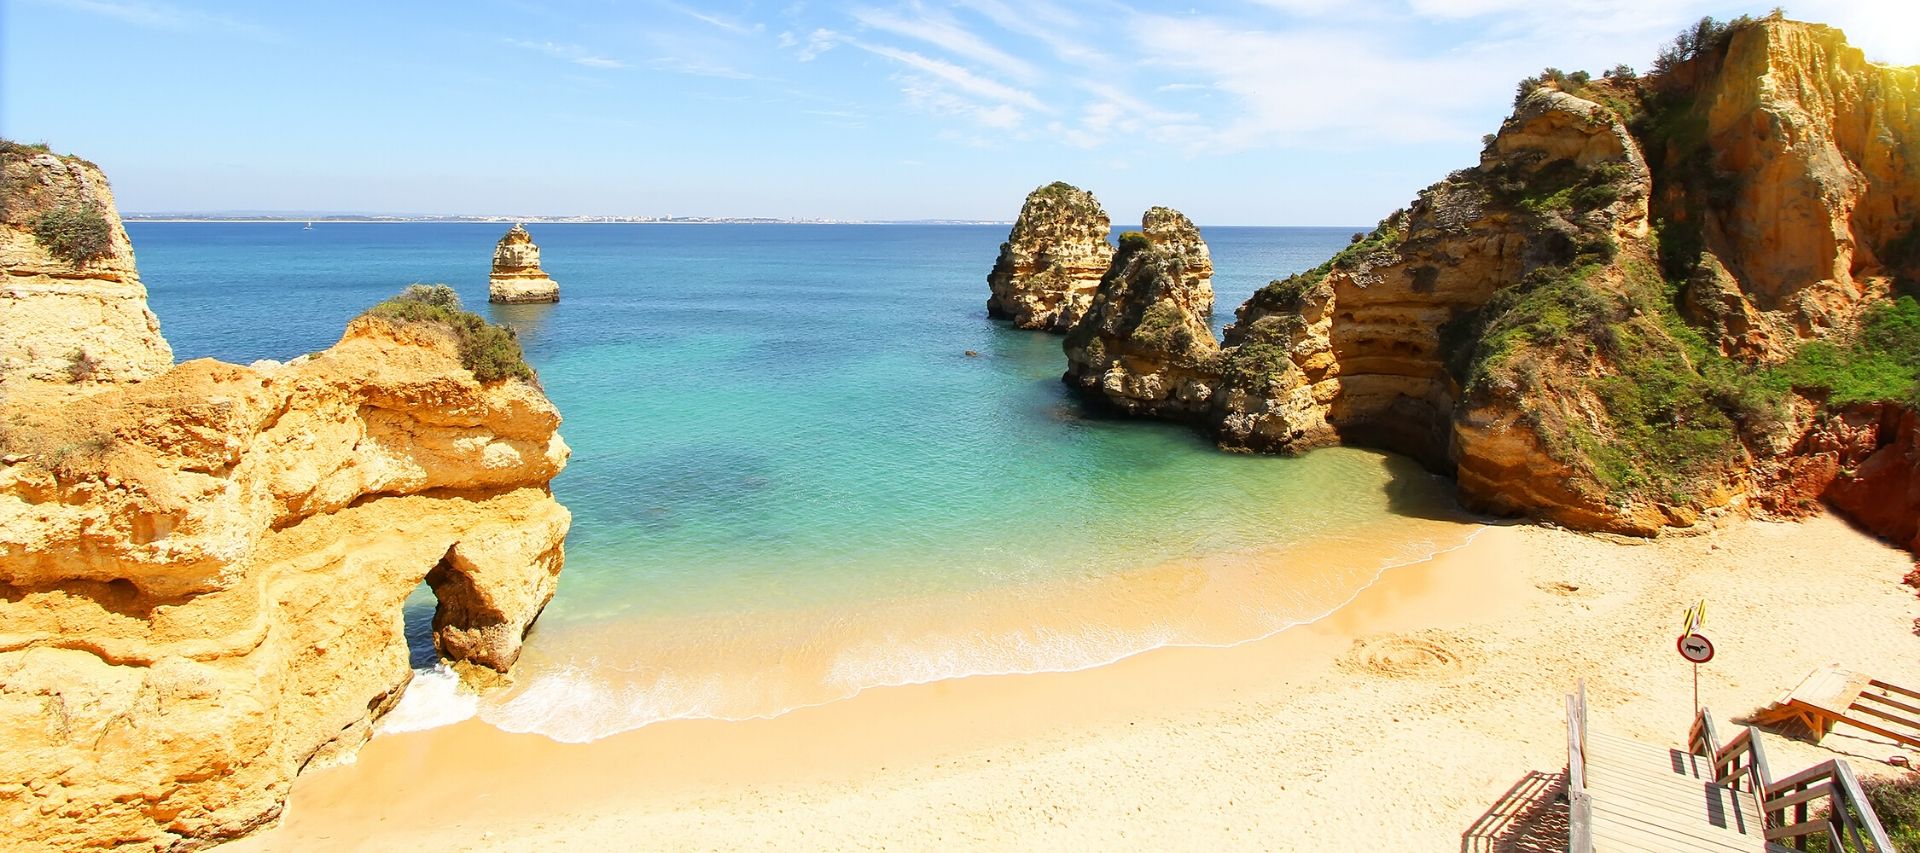 The Best Family-Friendly Hotels in the Algarve